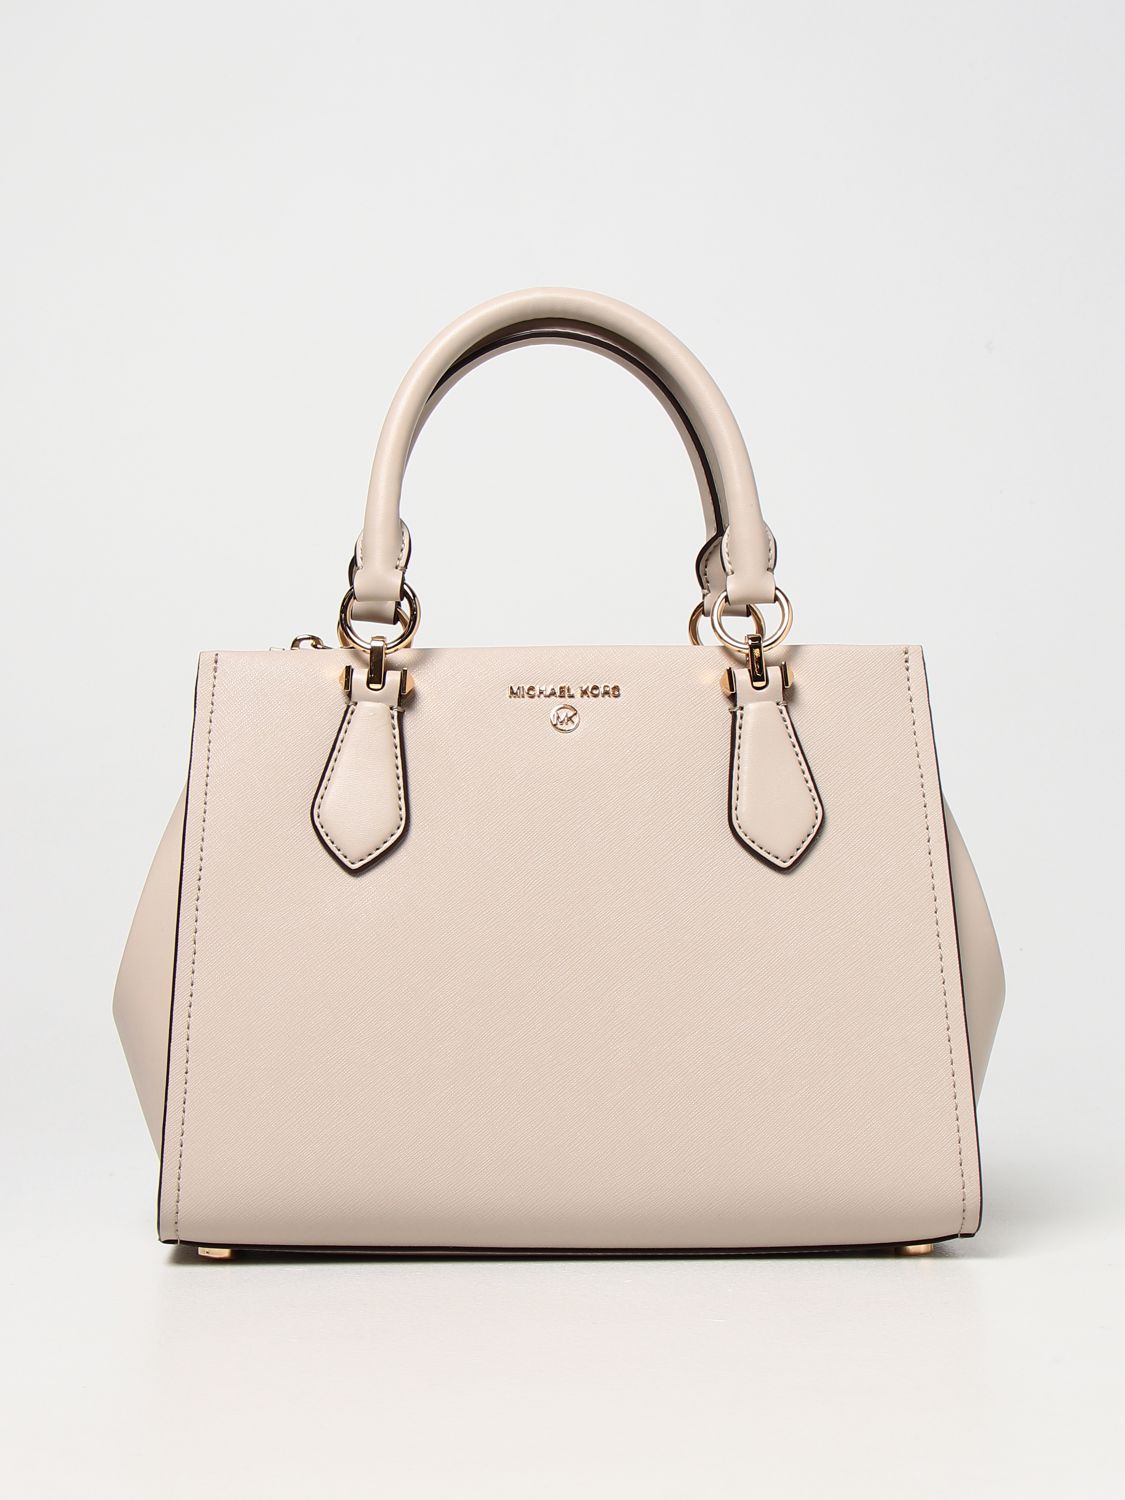 MICHAEL KORS: Marilyn Michael bag in Saffiano leather - Pink | Michael Kors  tote bags 30S2G6AS2L online at